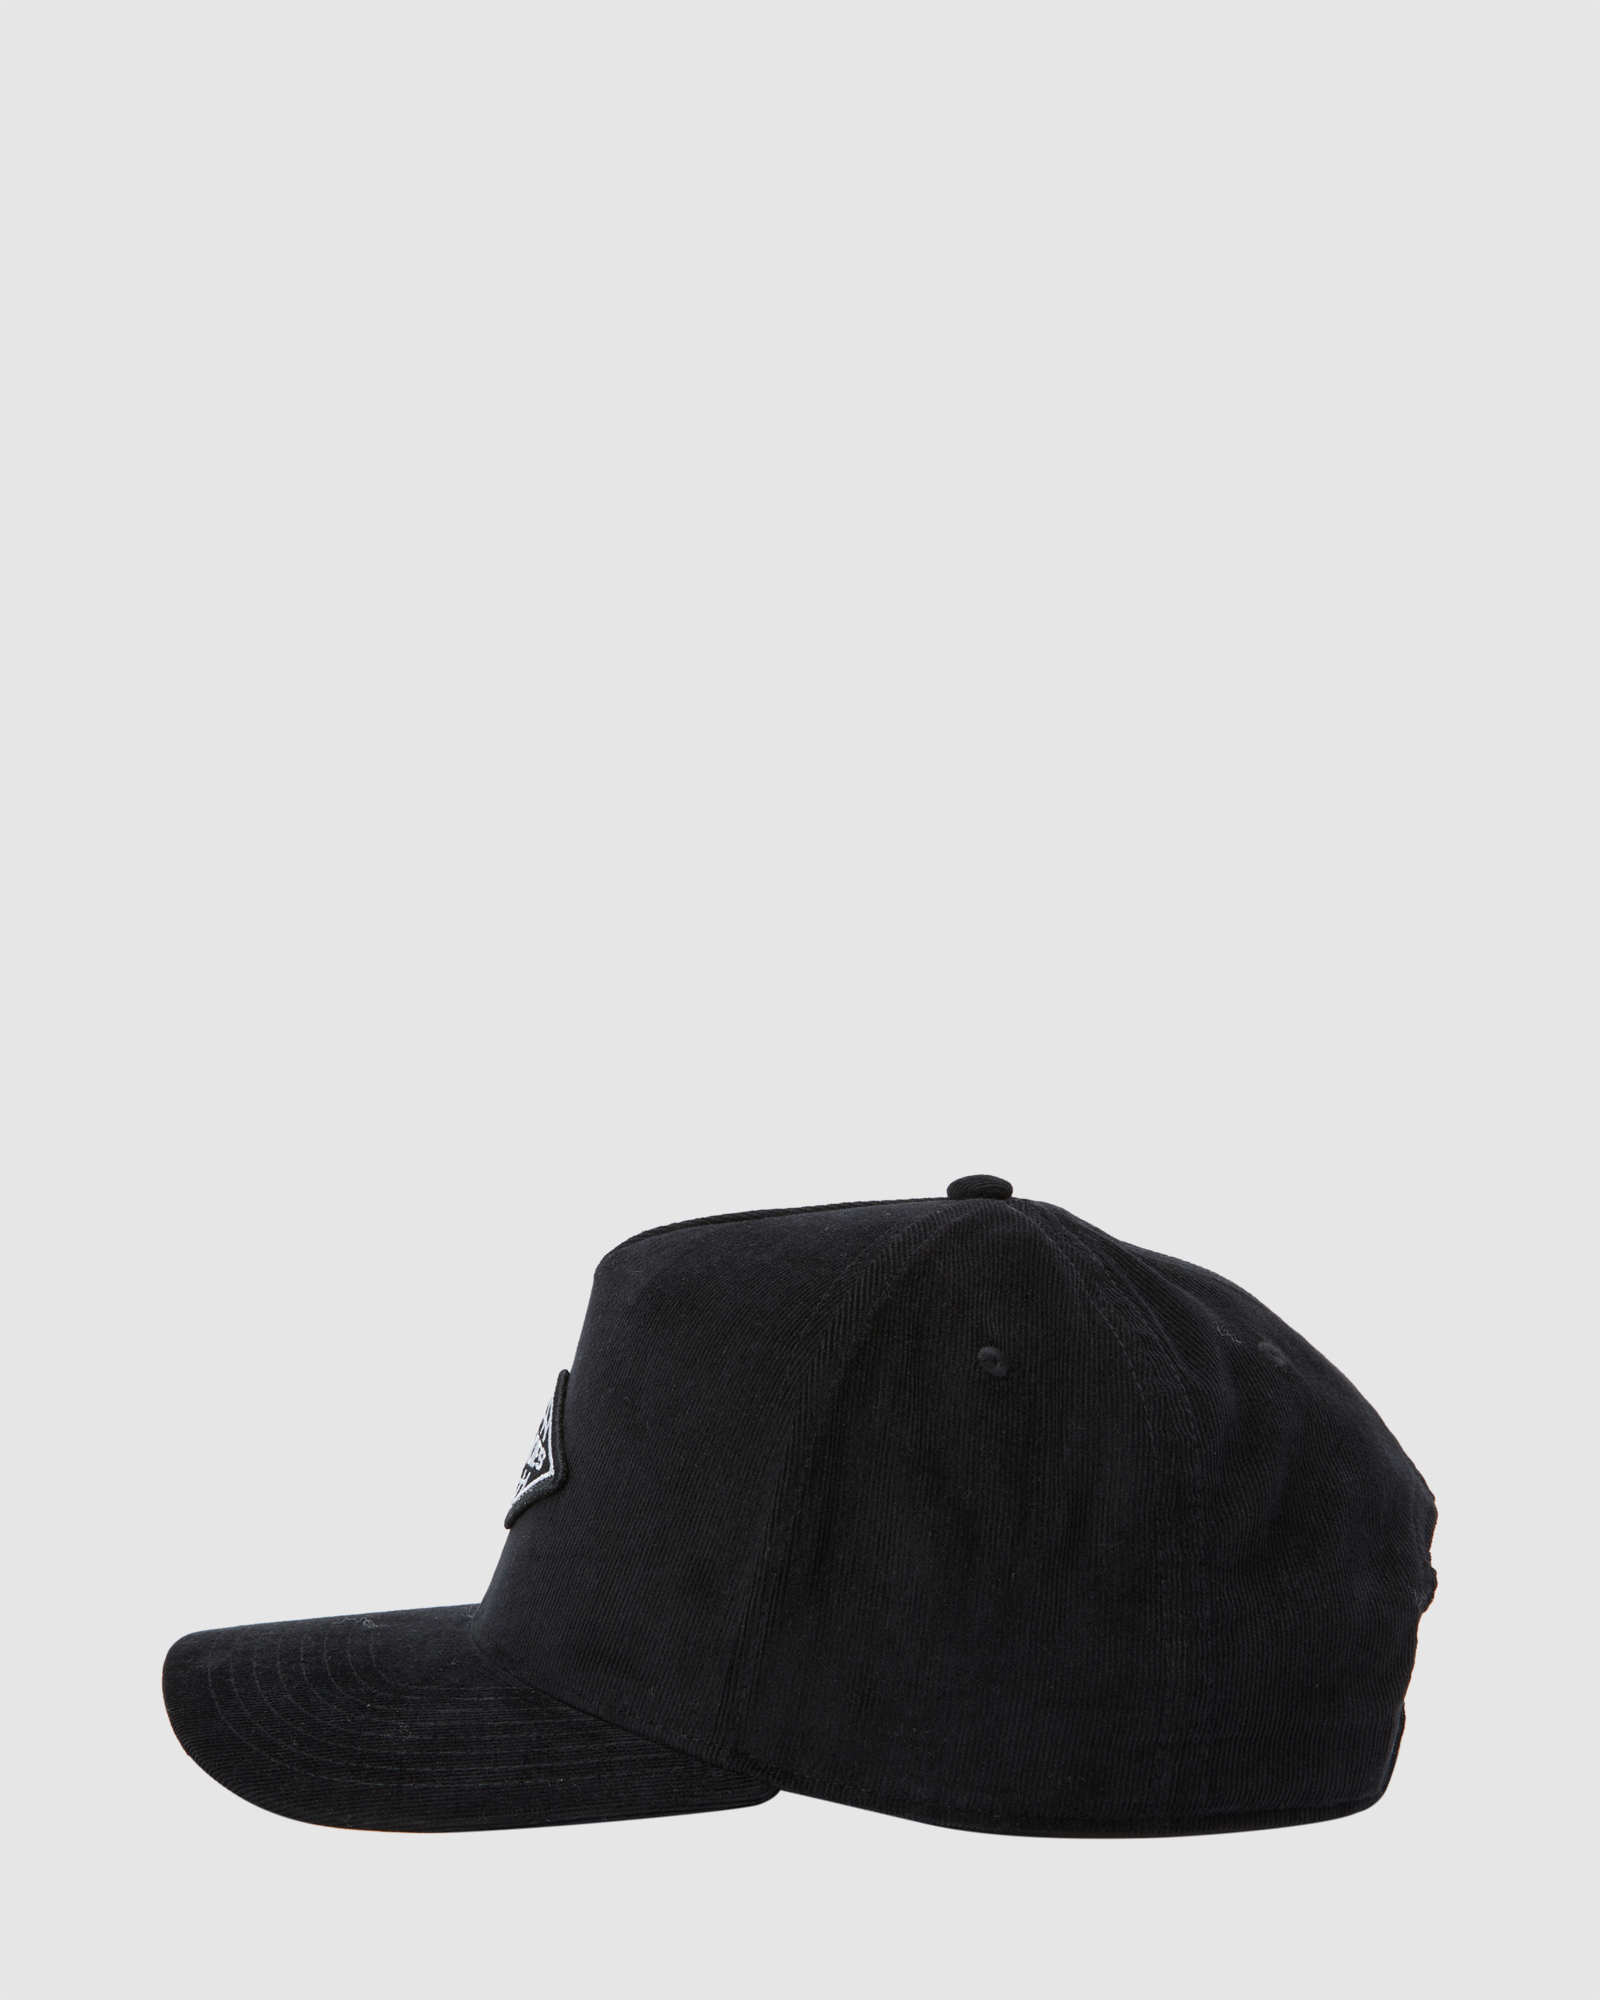 Dc Shoes Dc Expo | Black Hat SurfStitch - Snapback